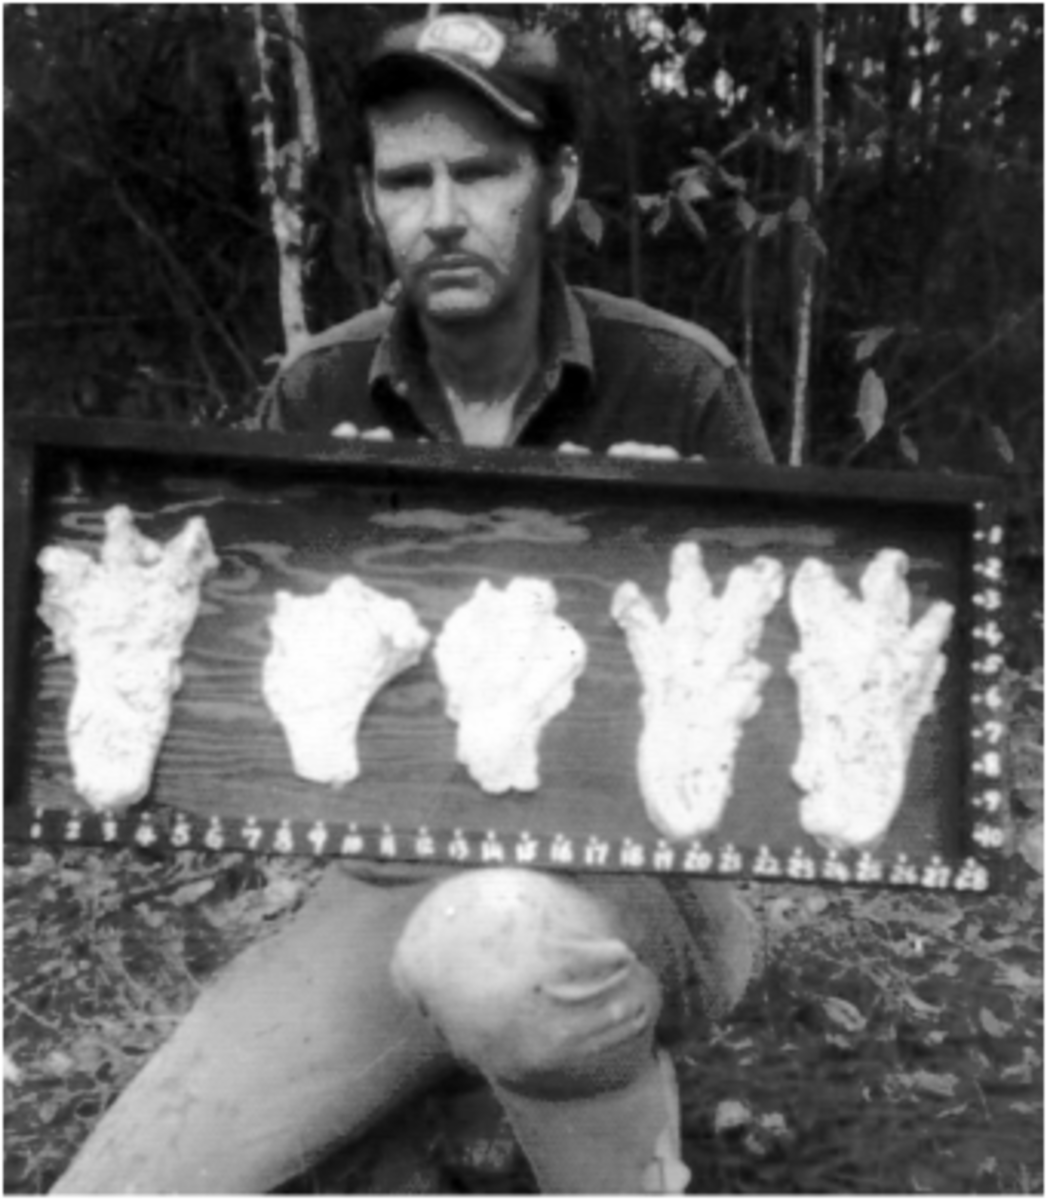 Harlan Ford with Honey Island Swamp Monster footprint castings.